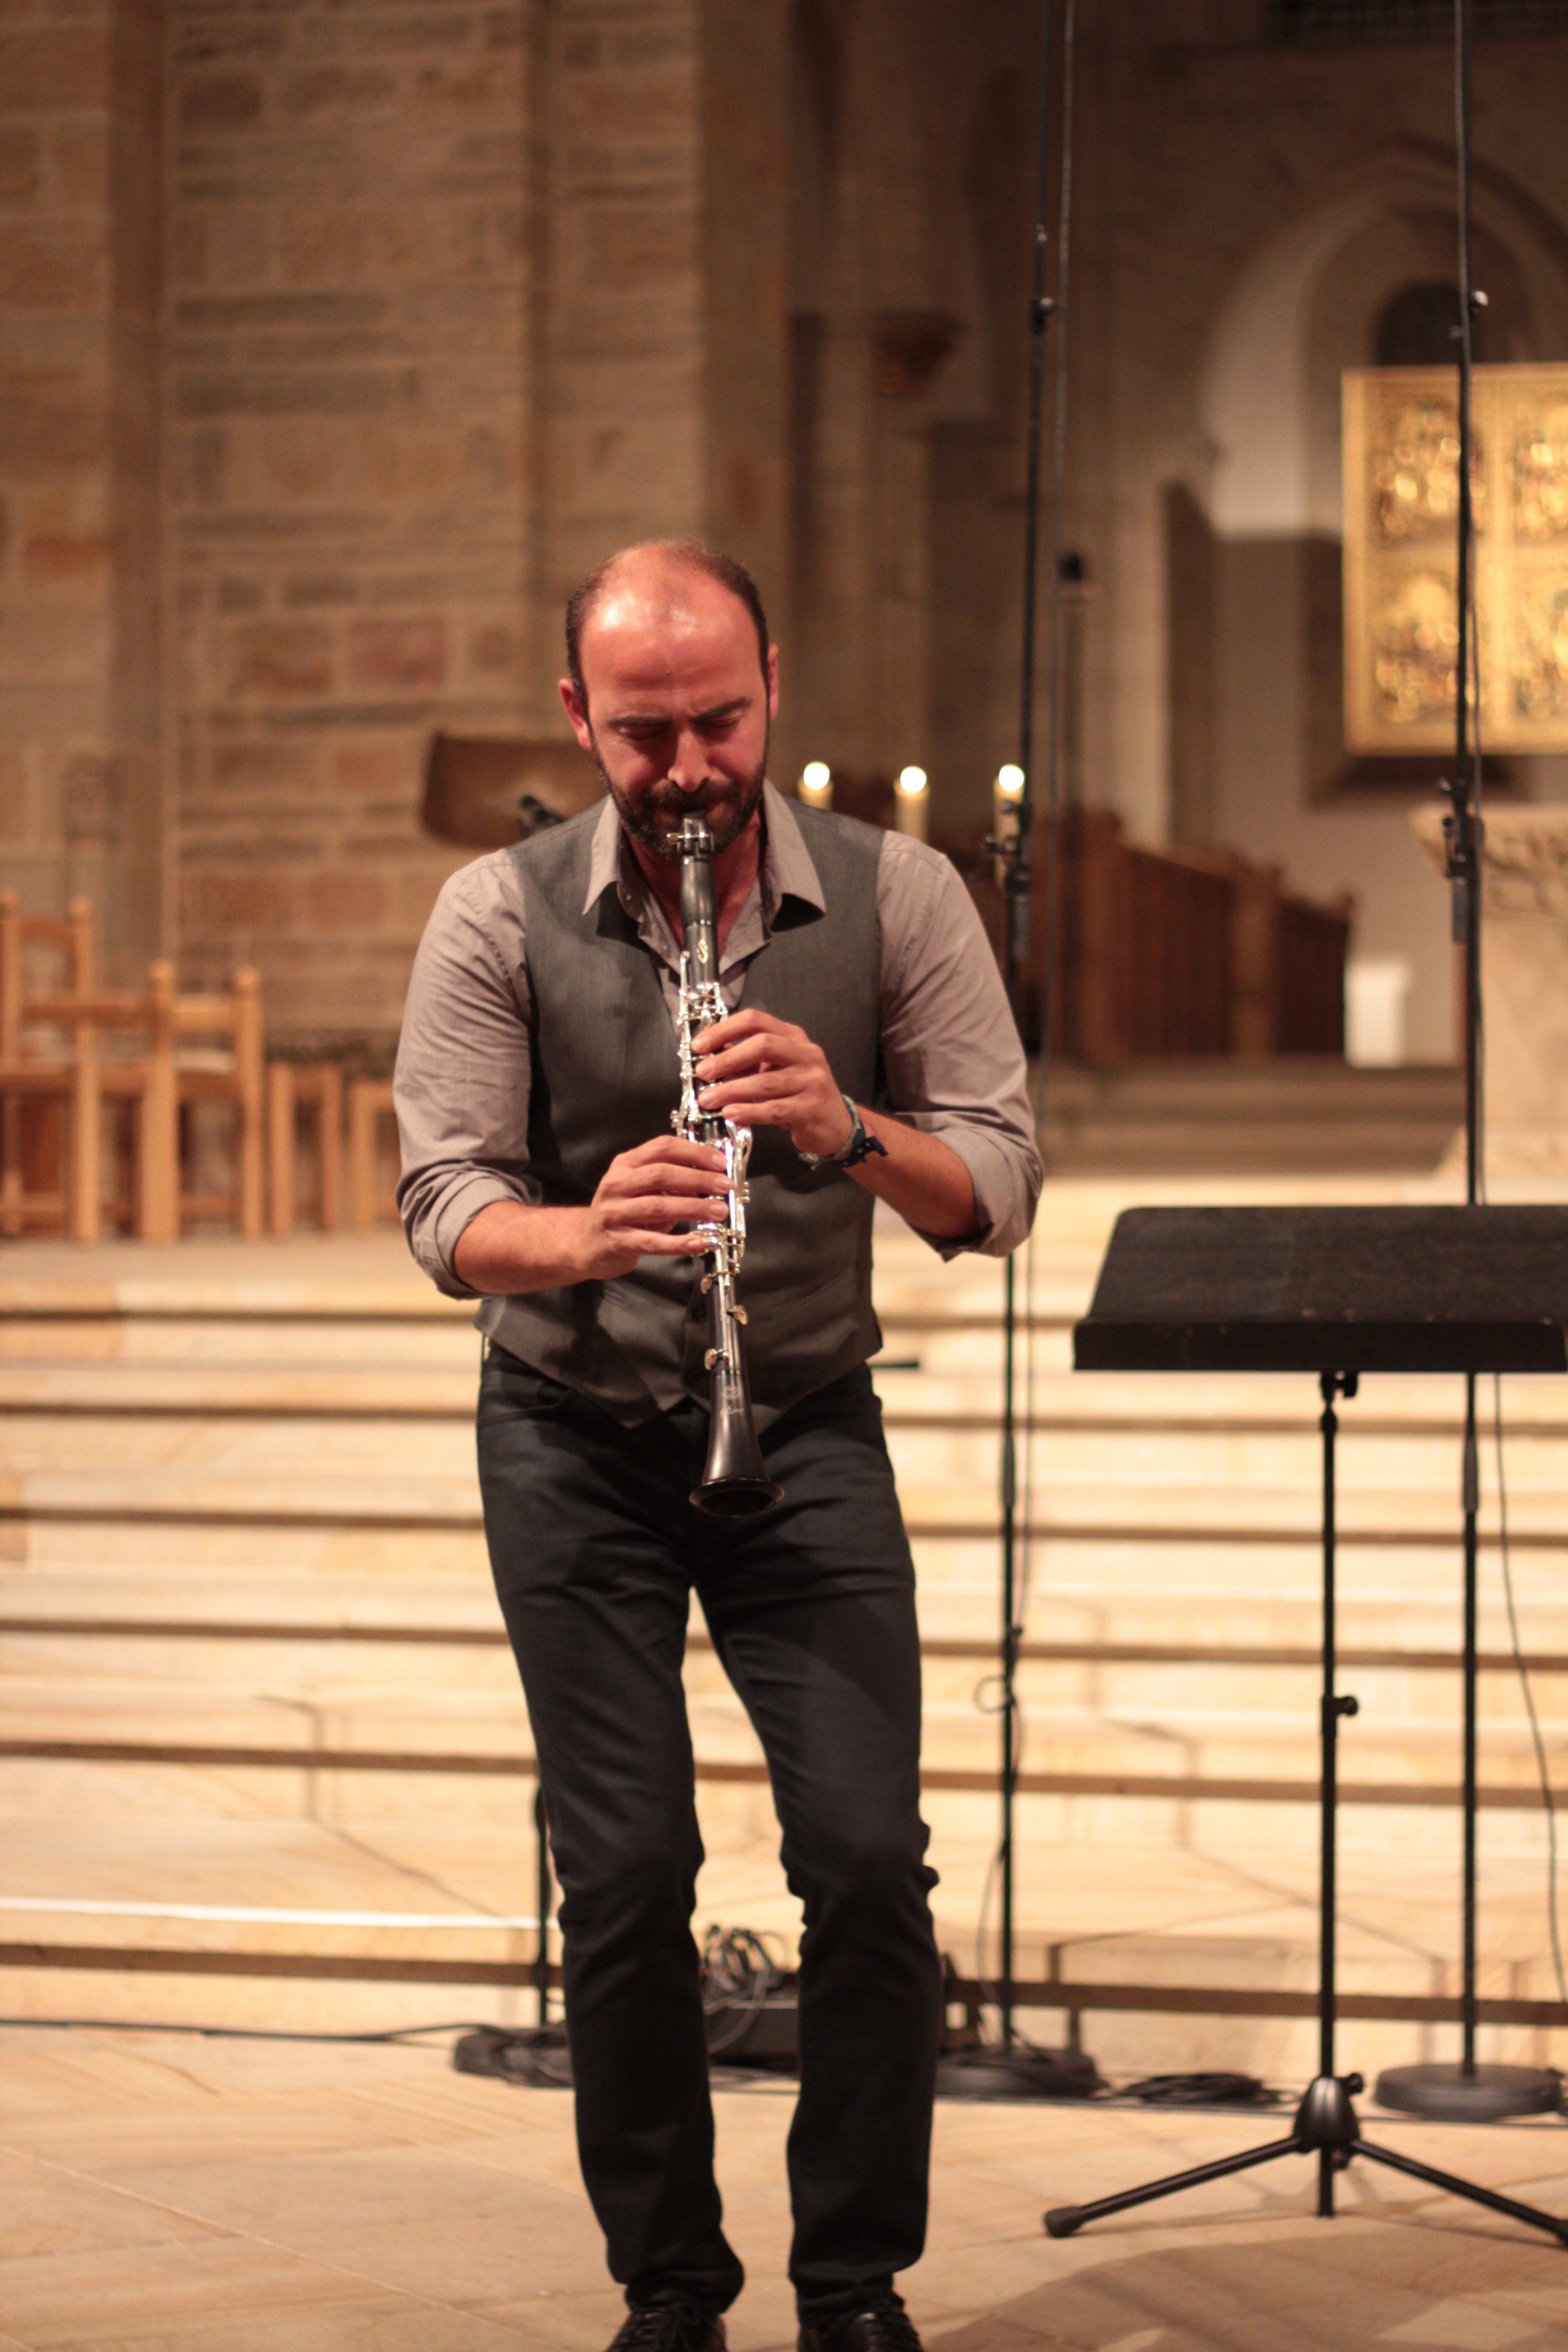 Clarinettist Kinan Azmeh performing at the Morgenland Festival 2014 in Osnabruck (photo: Marian Brehmer)